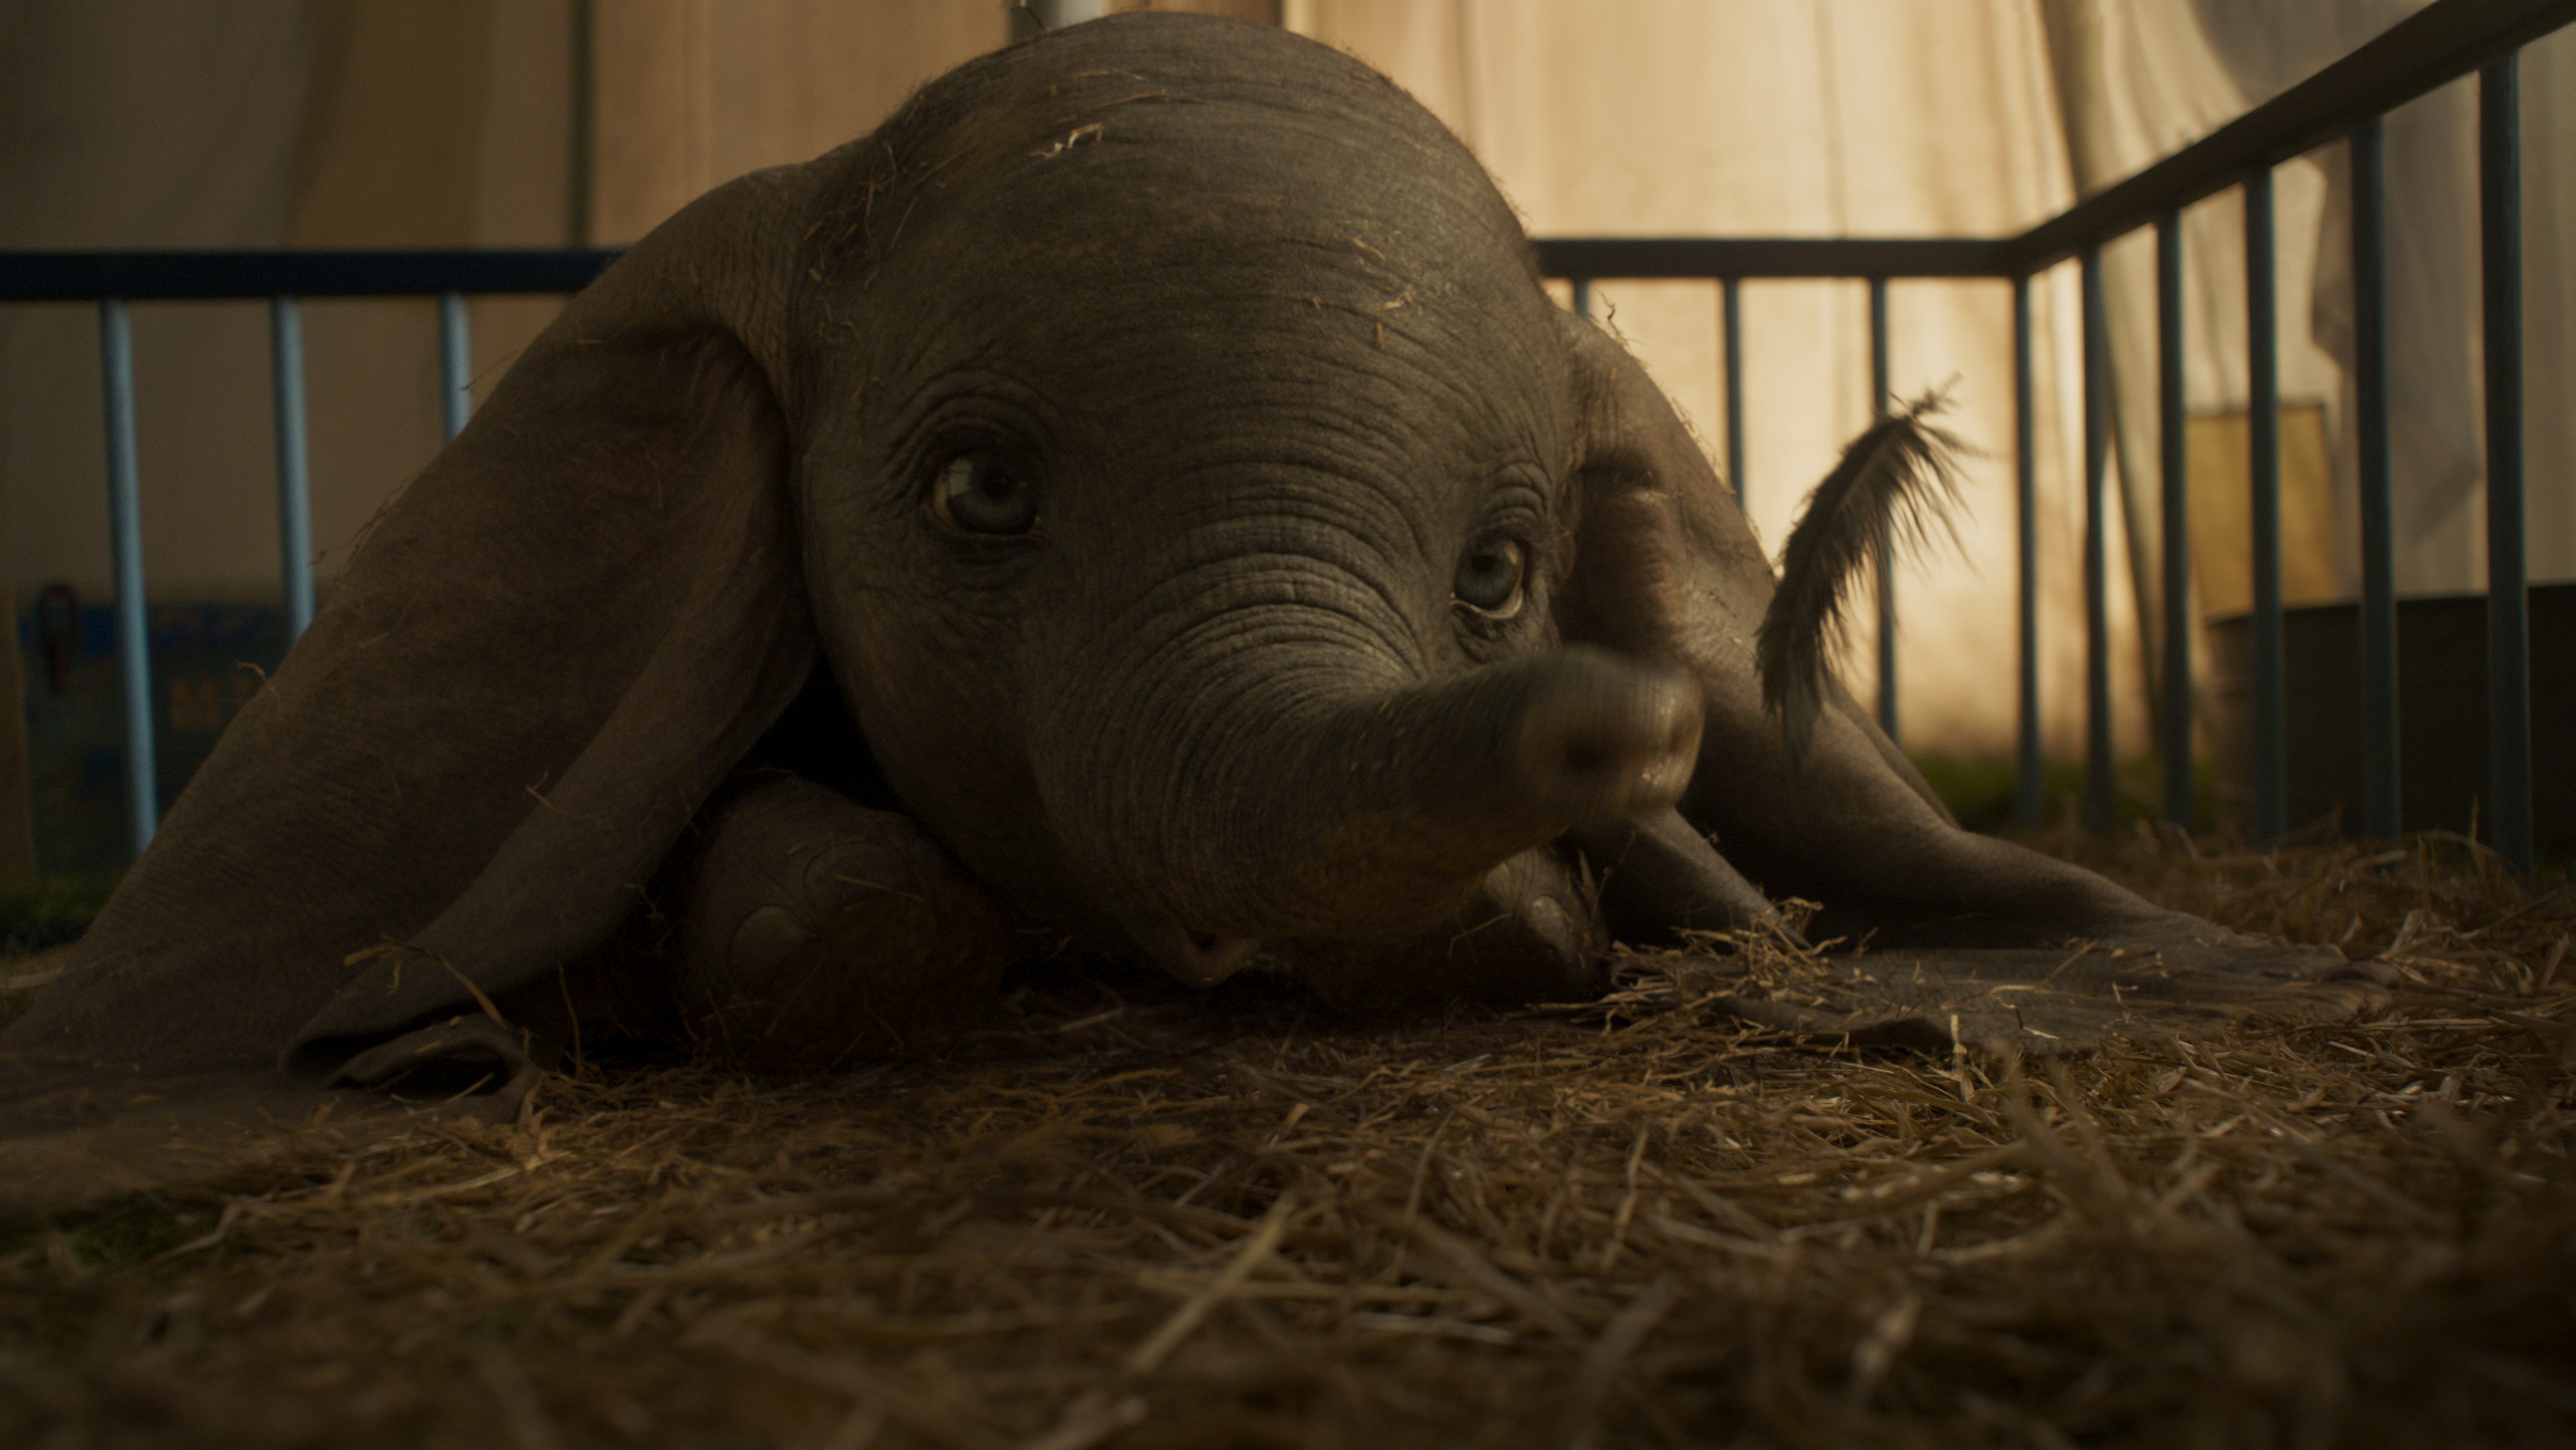 These are the most inspirational live-action Dumbo Quotes from the 2019 movie. These quotes are relatable, emotional, and profound!